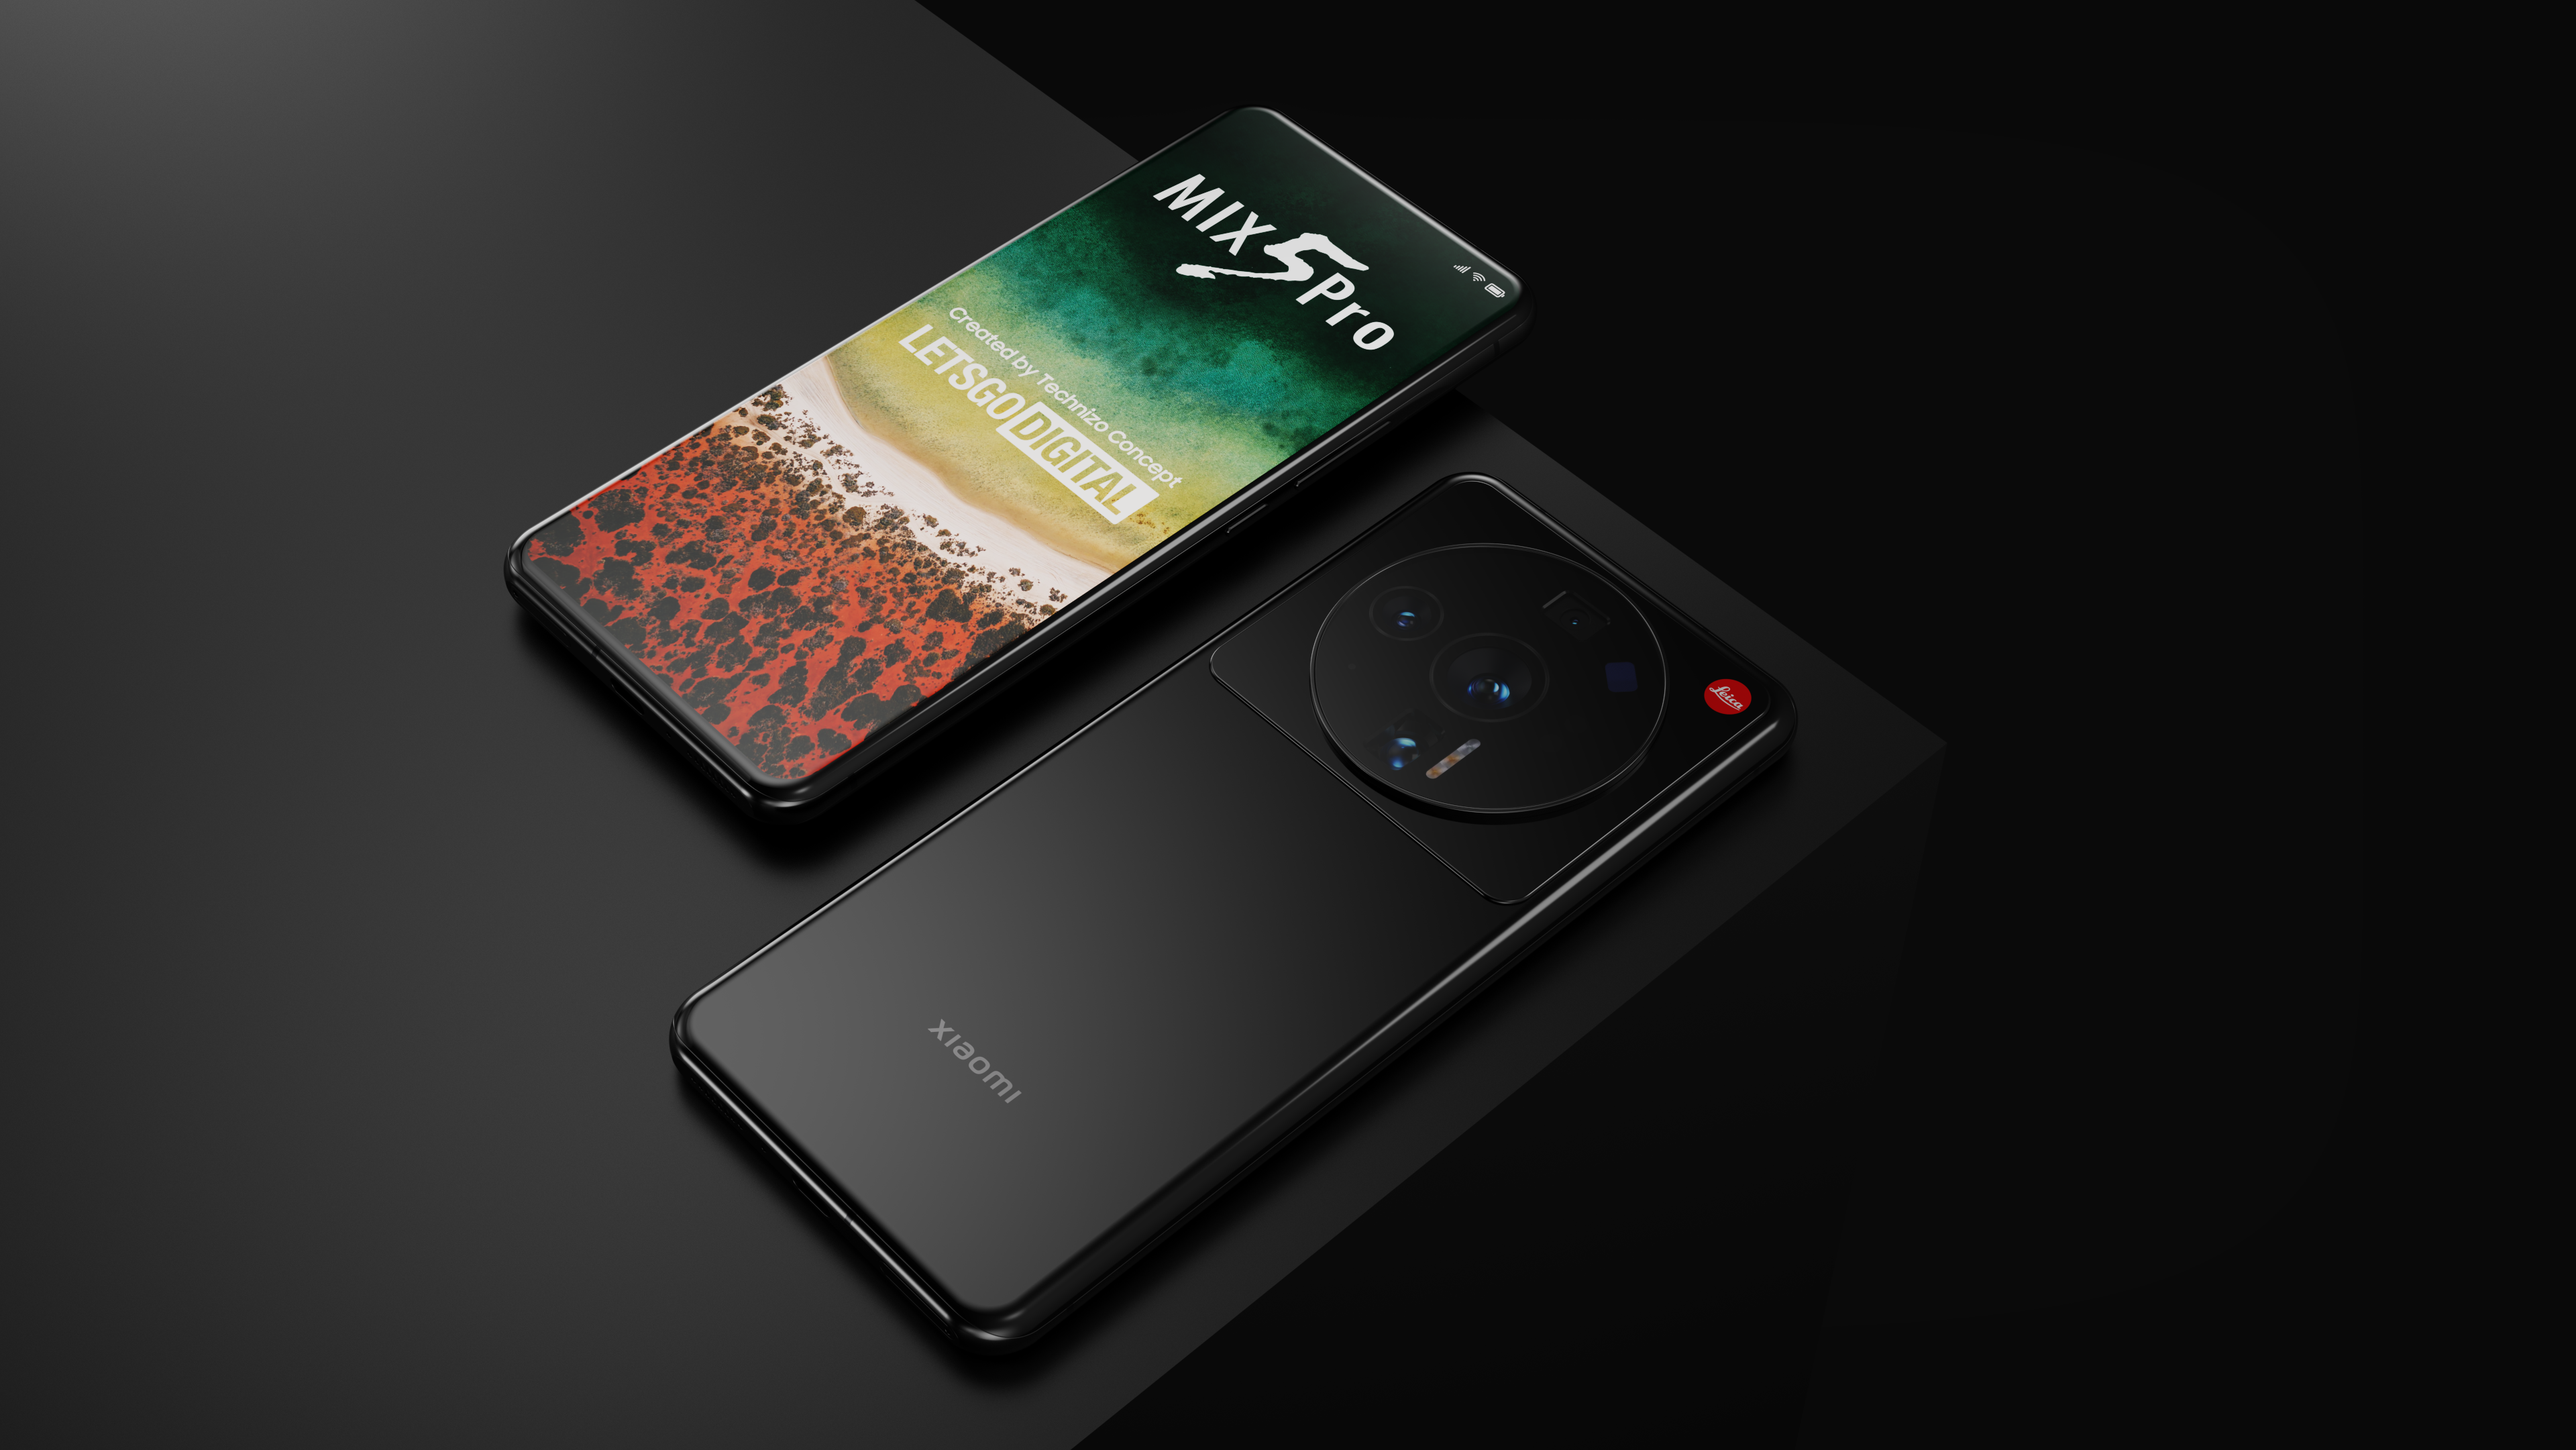 Xiaomi Mi 9 render appears with probable specifications - Gizmochina